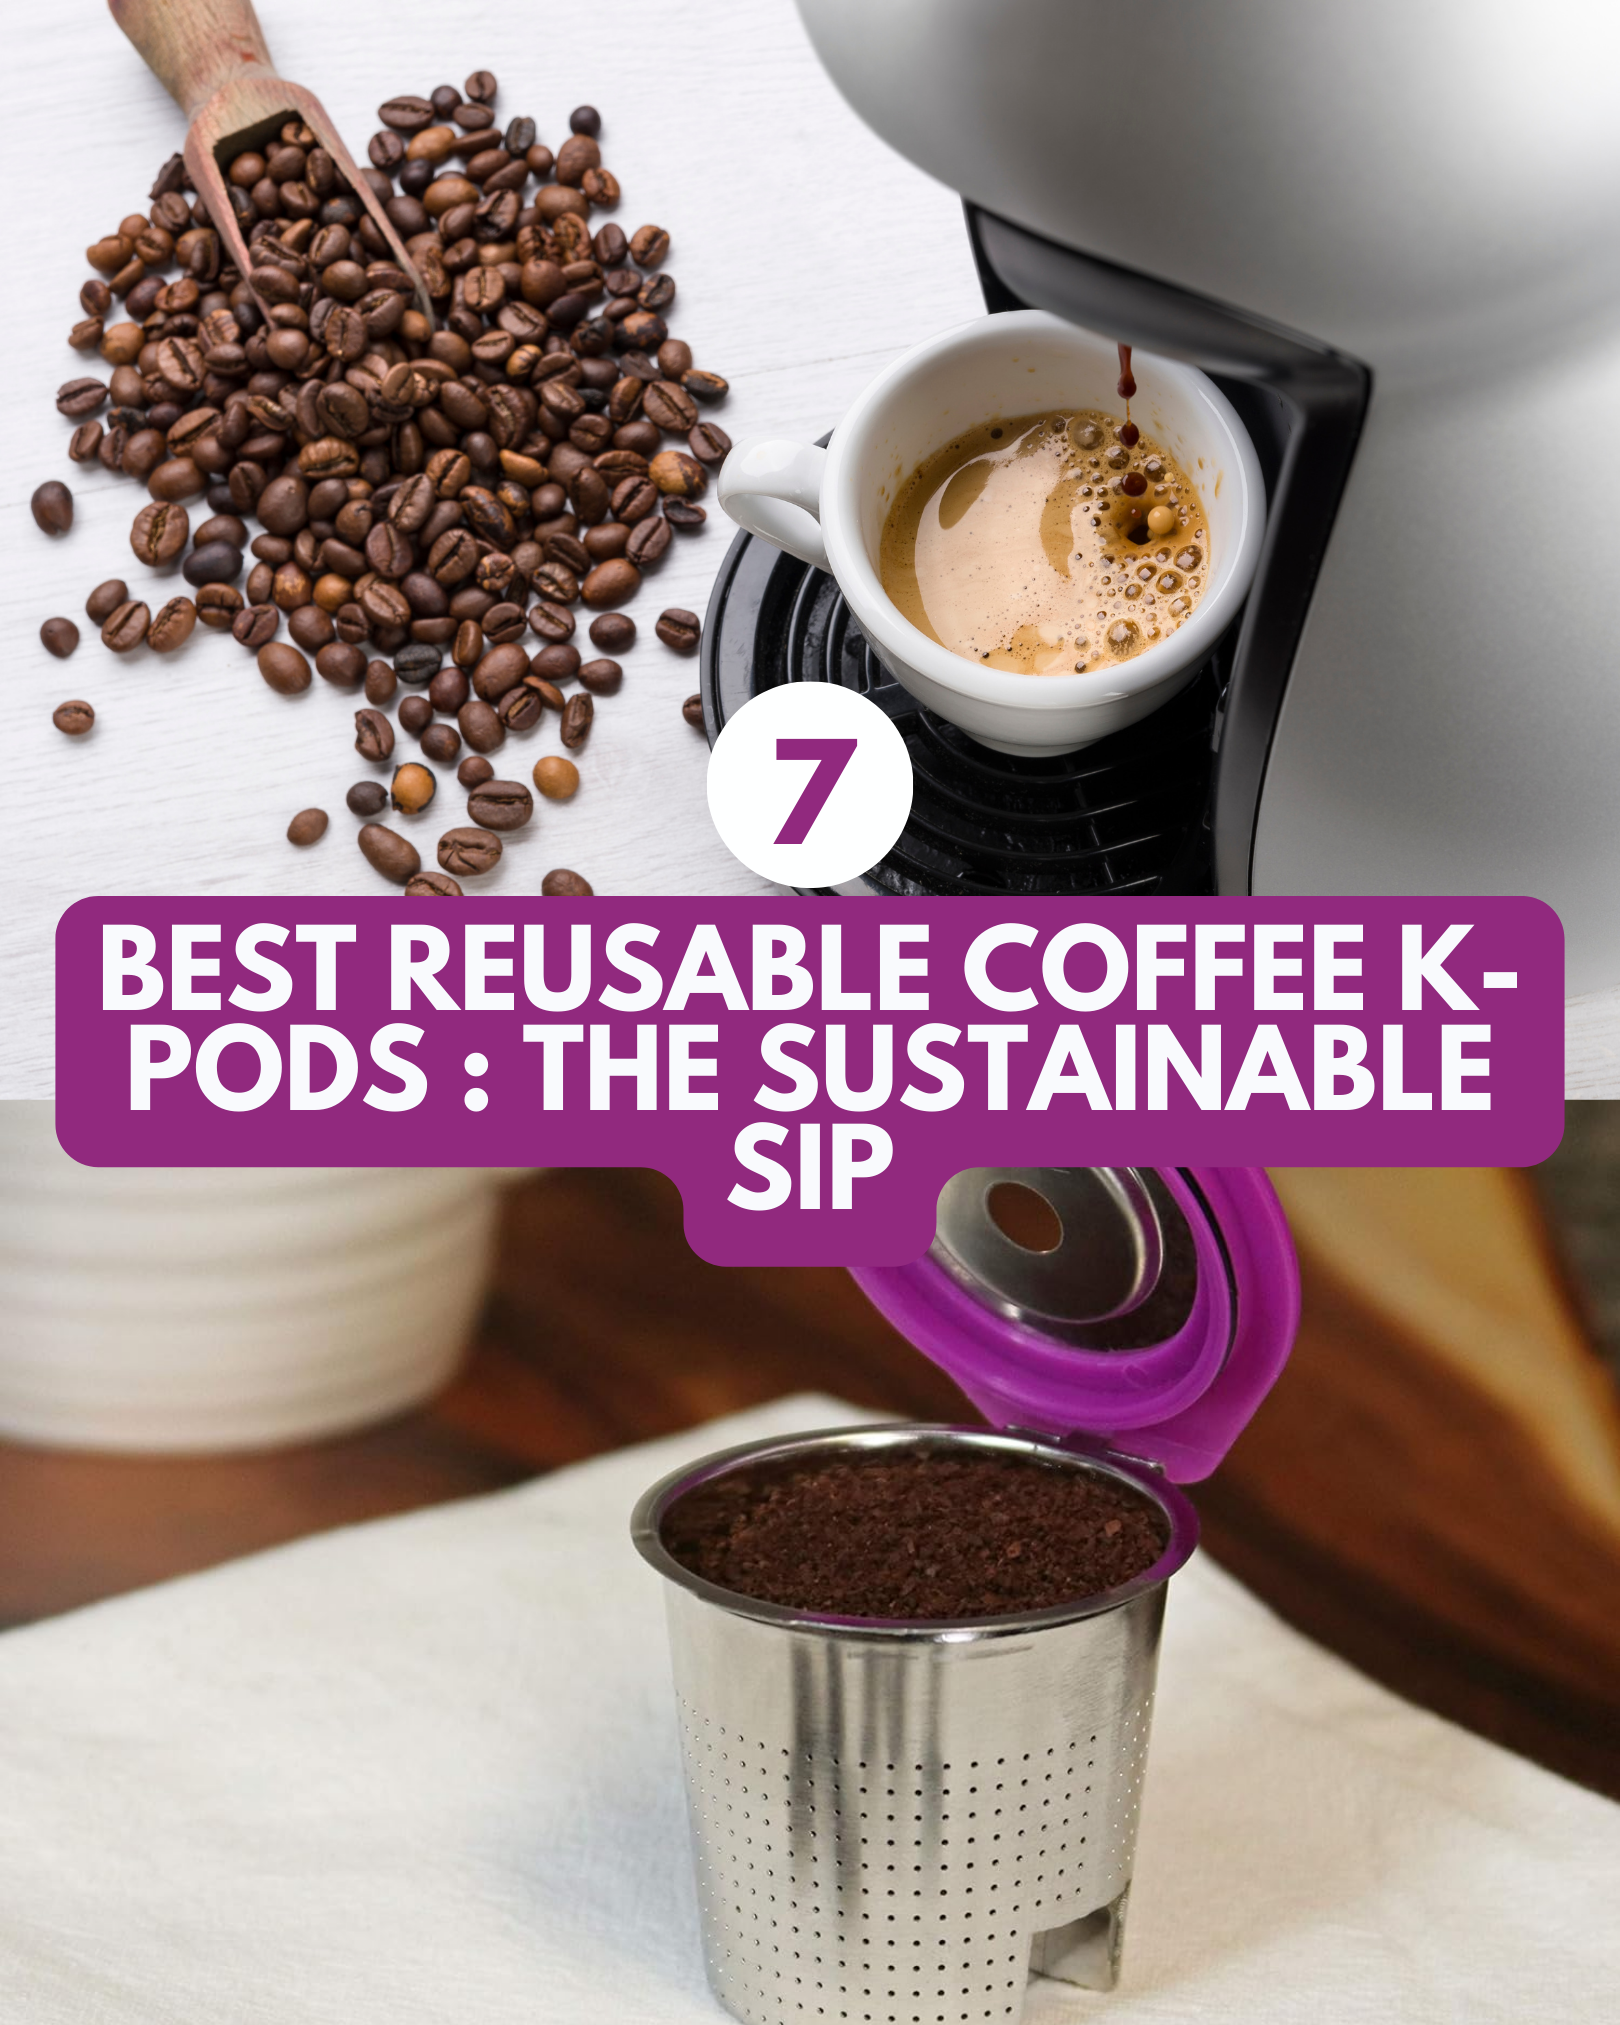 7 Best Reusable Coffee K-Pods - The Sustainable Sip